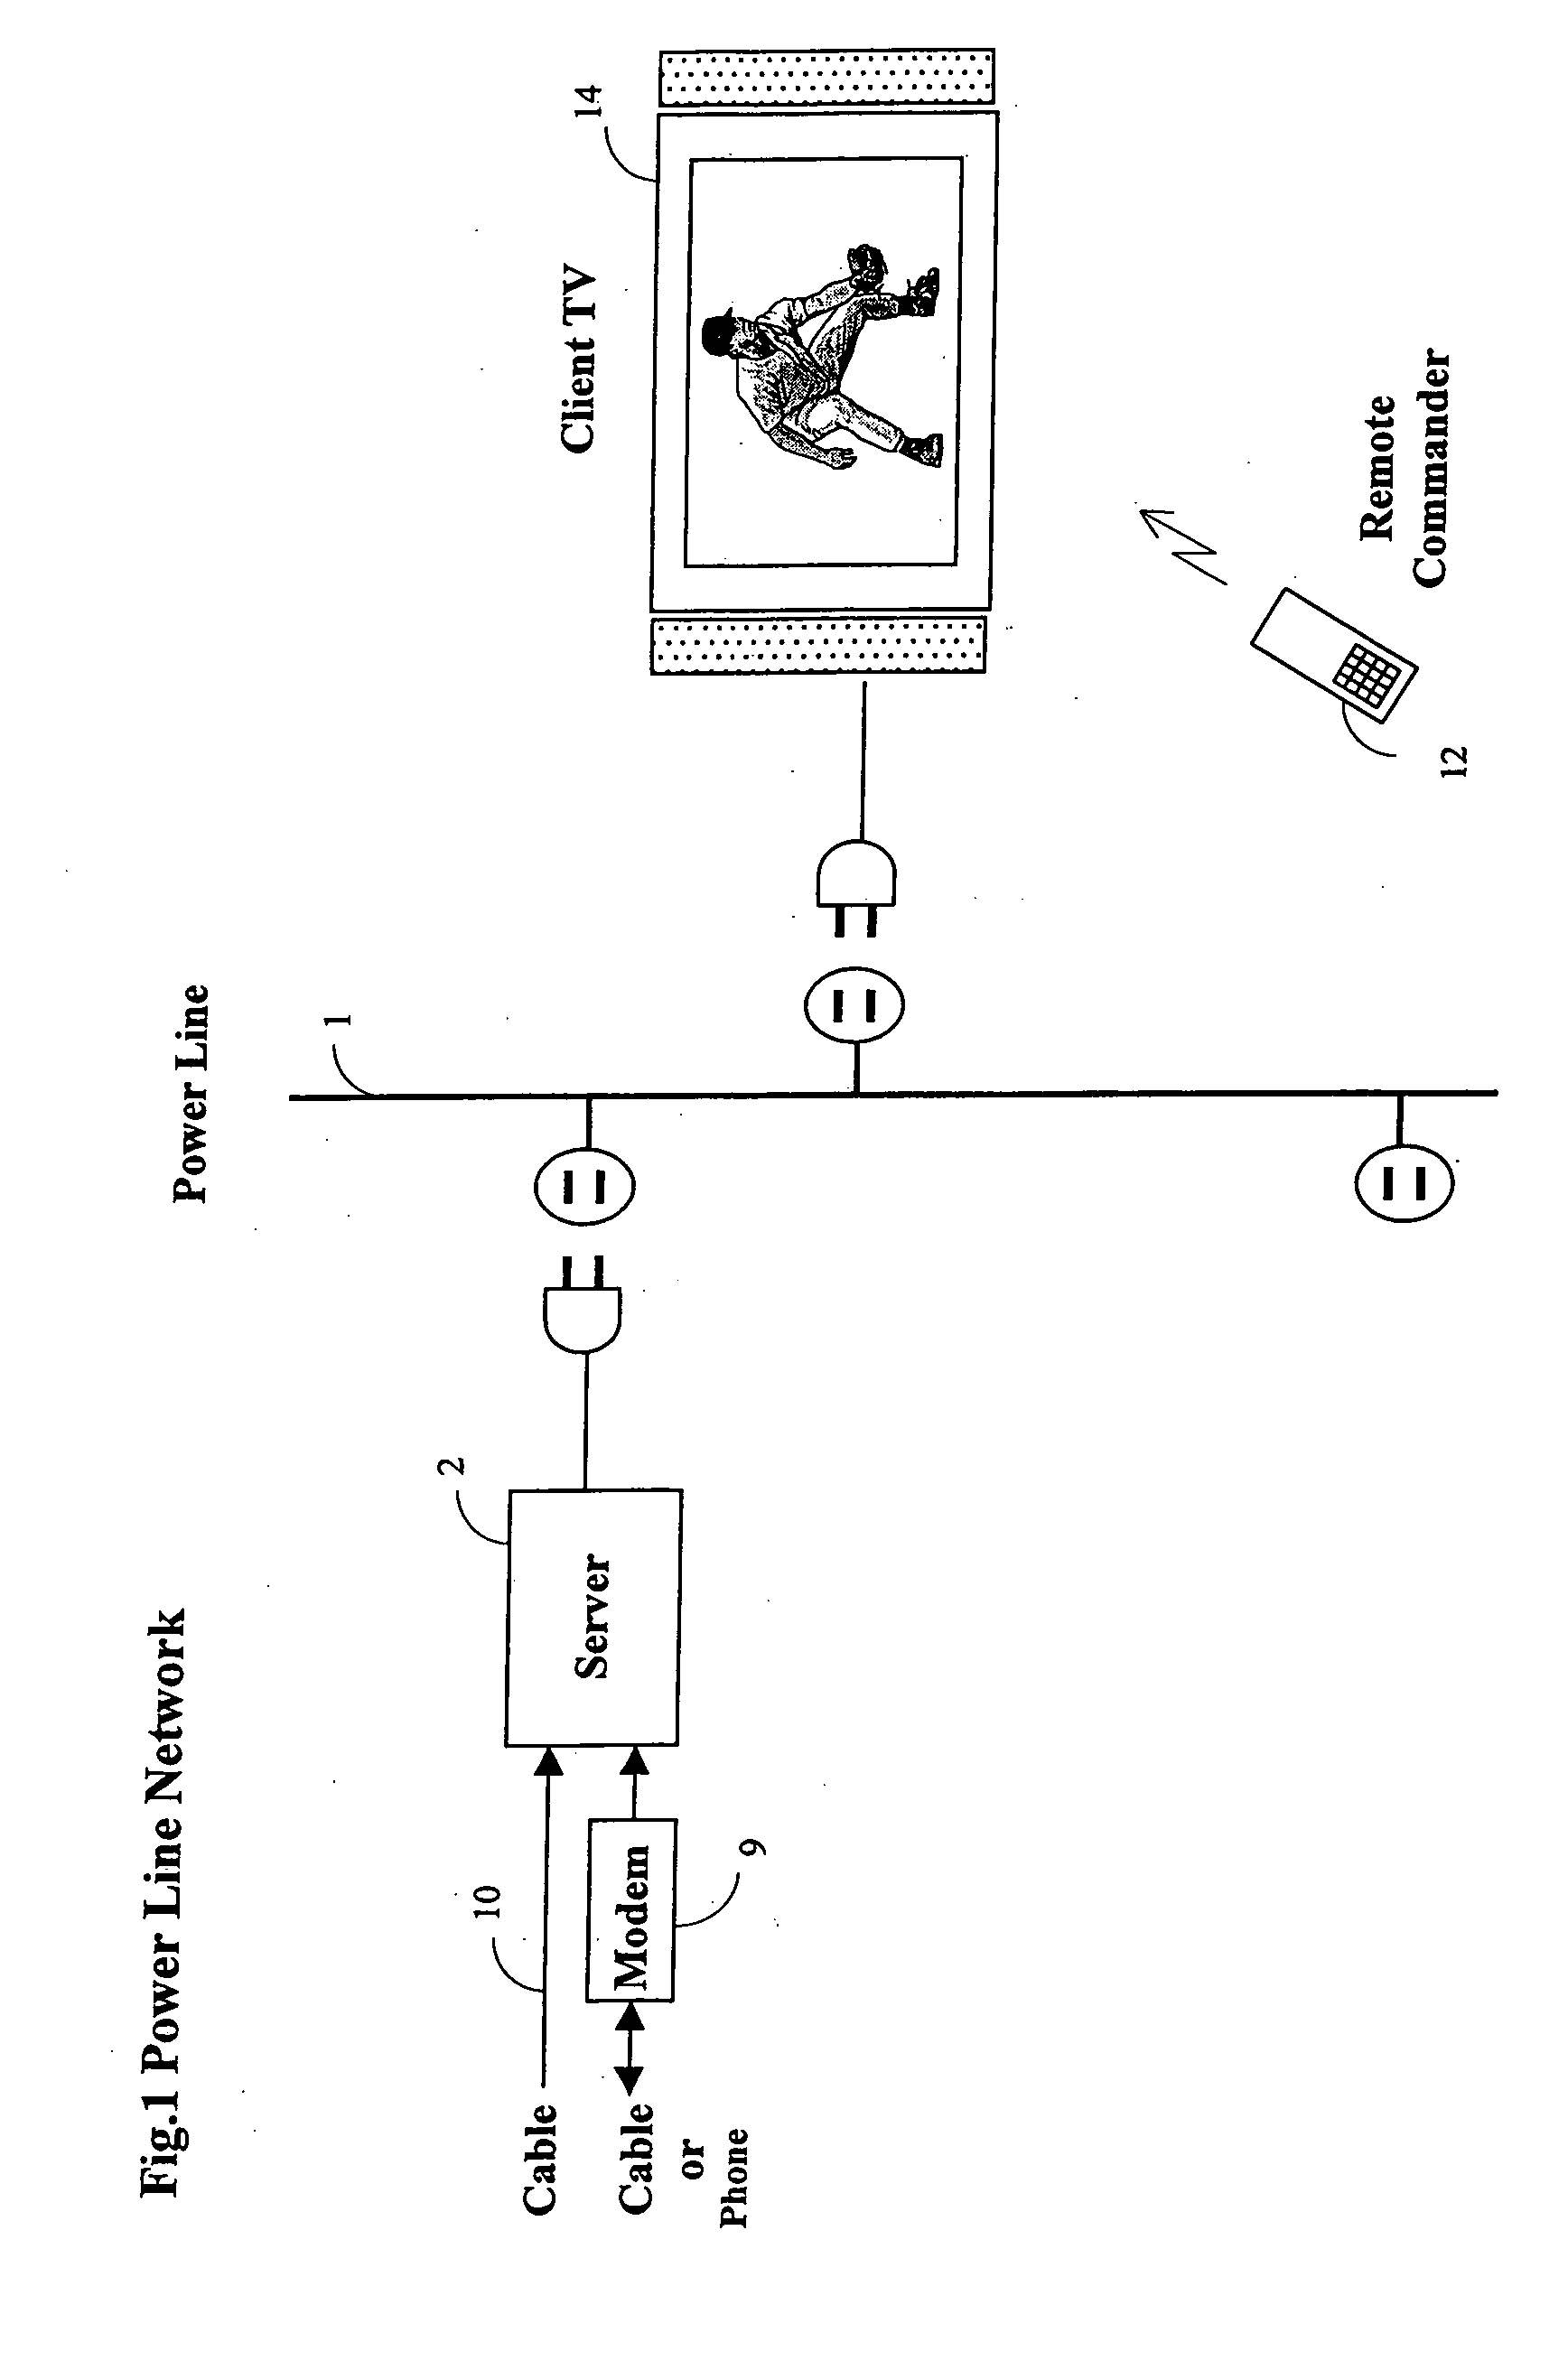 System and method for improving home network GUI response time and presentation